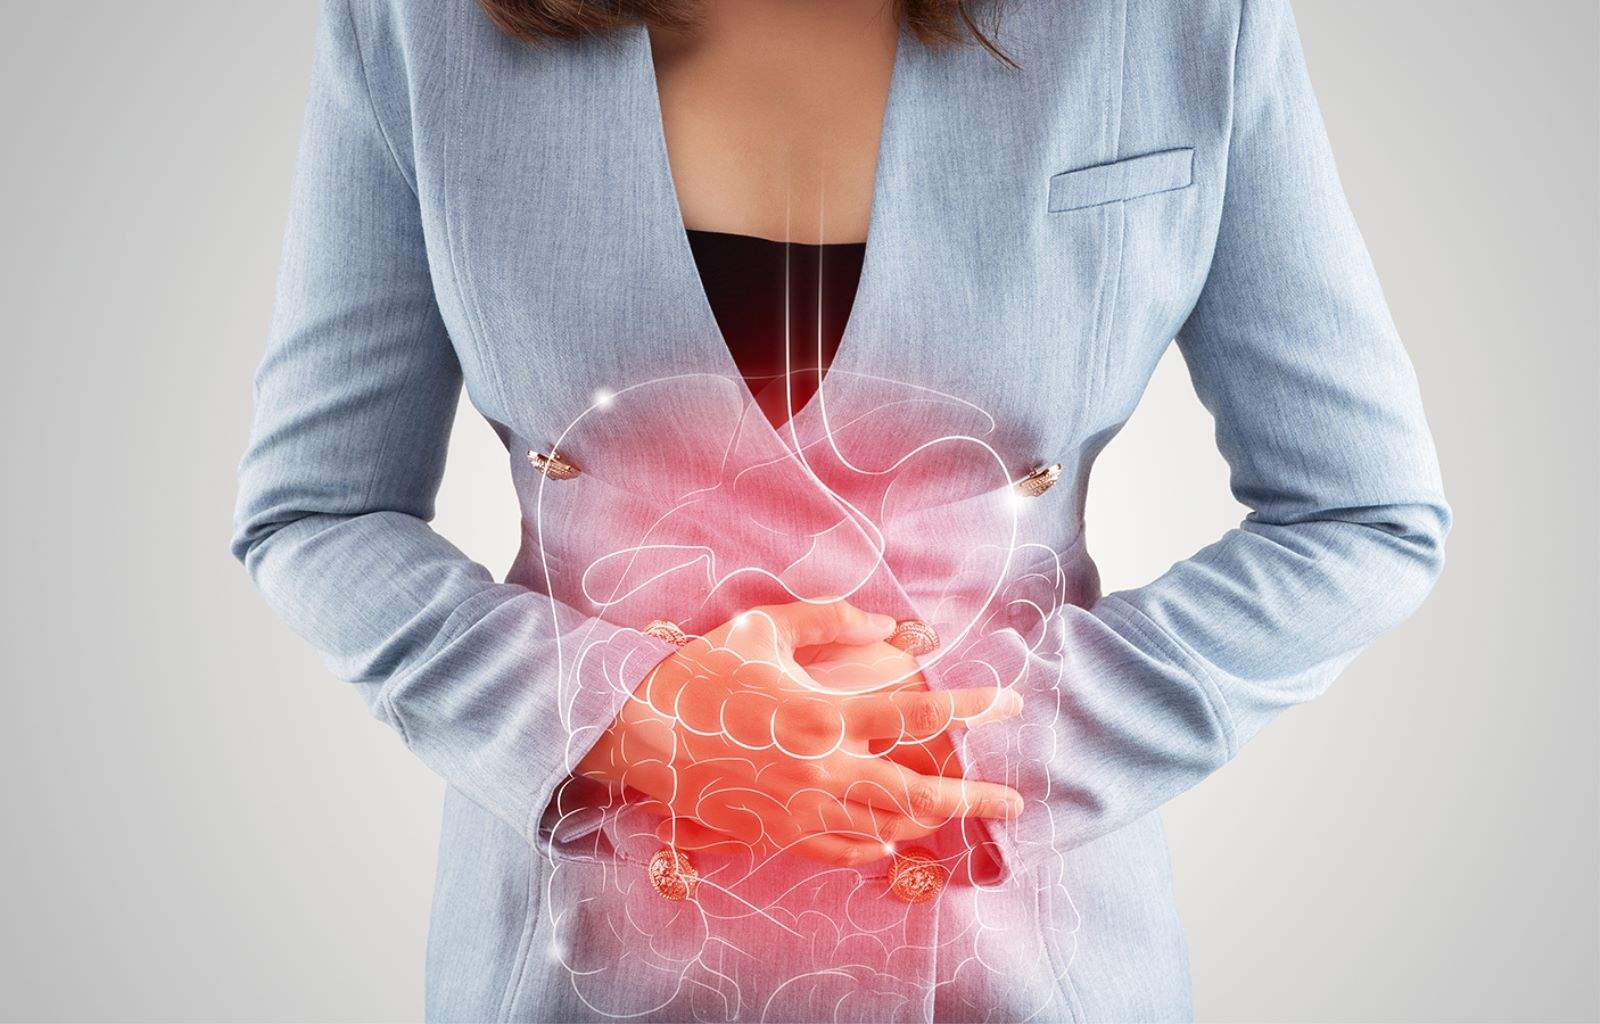 Which are the 5 herbs that effectively treat Irritable Bowel syndrome?